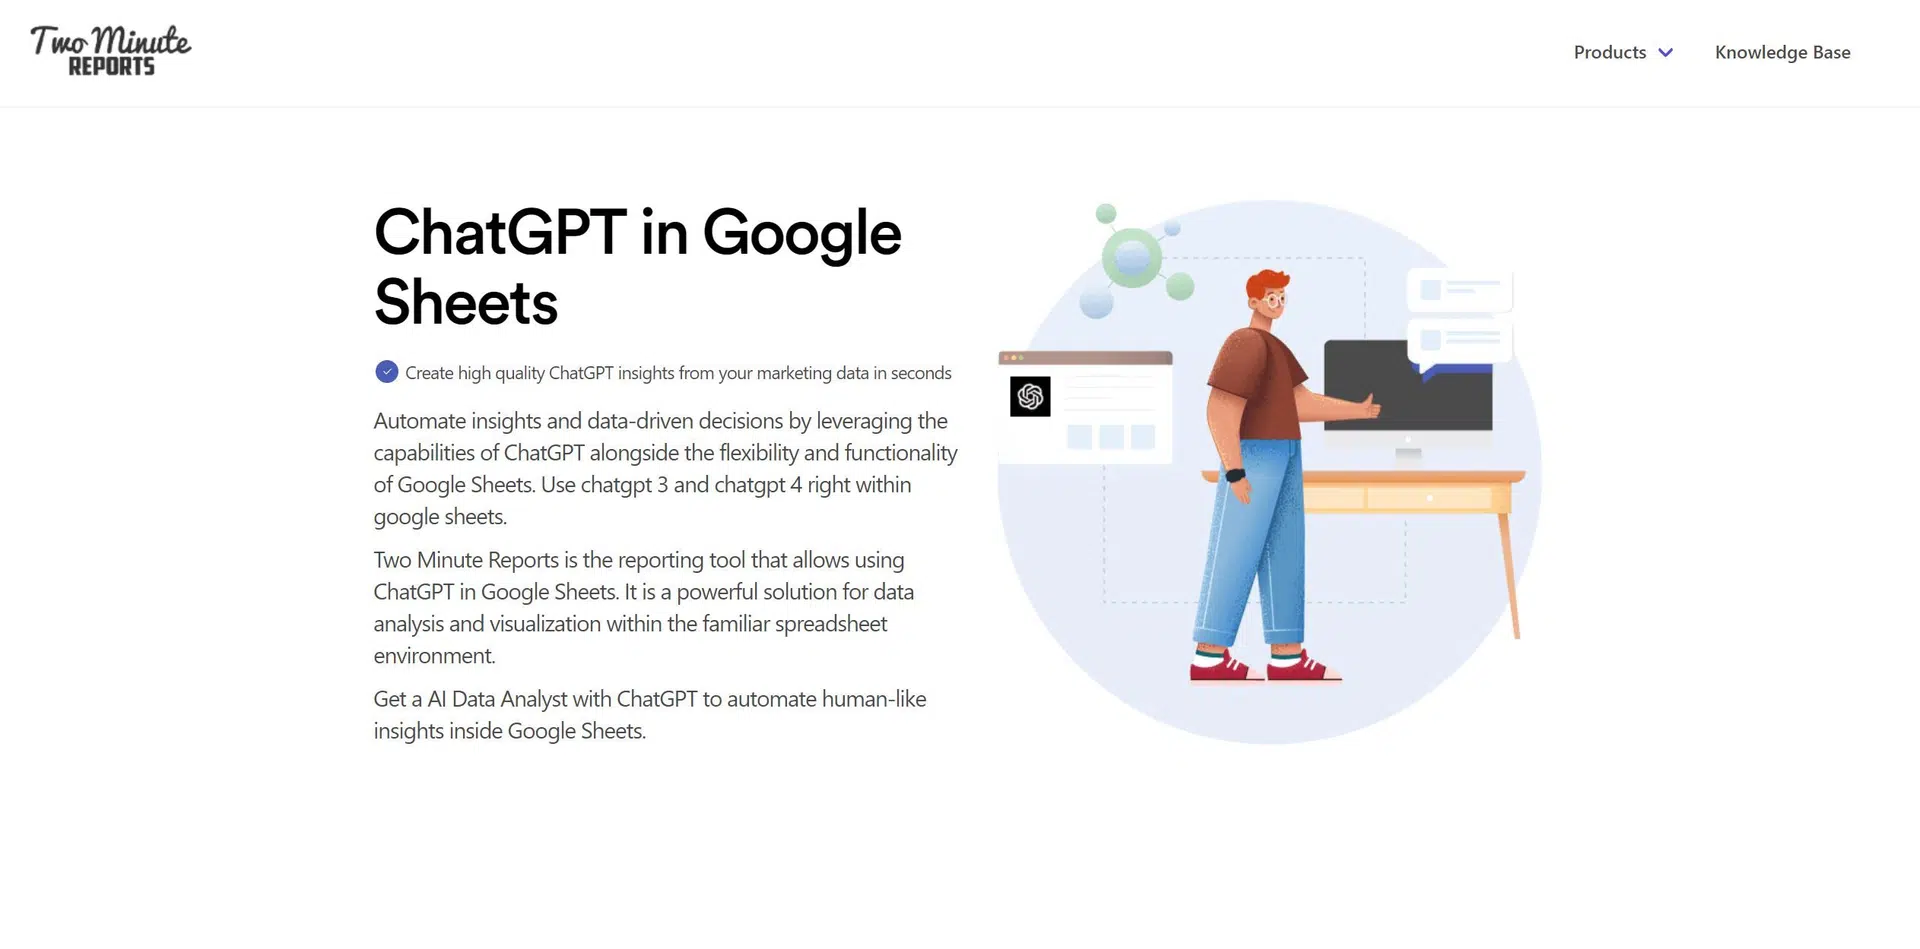 ChatGPT in Google Sheetswebsite picture